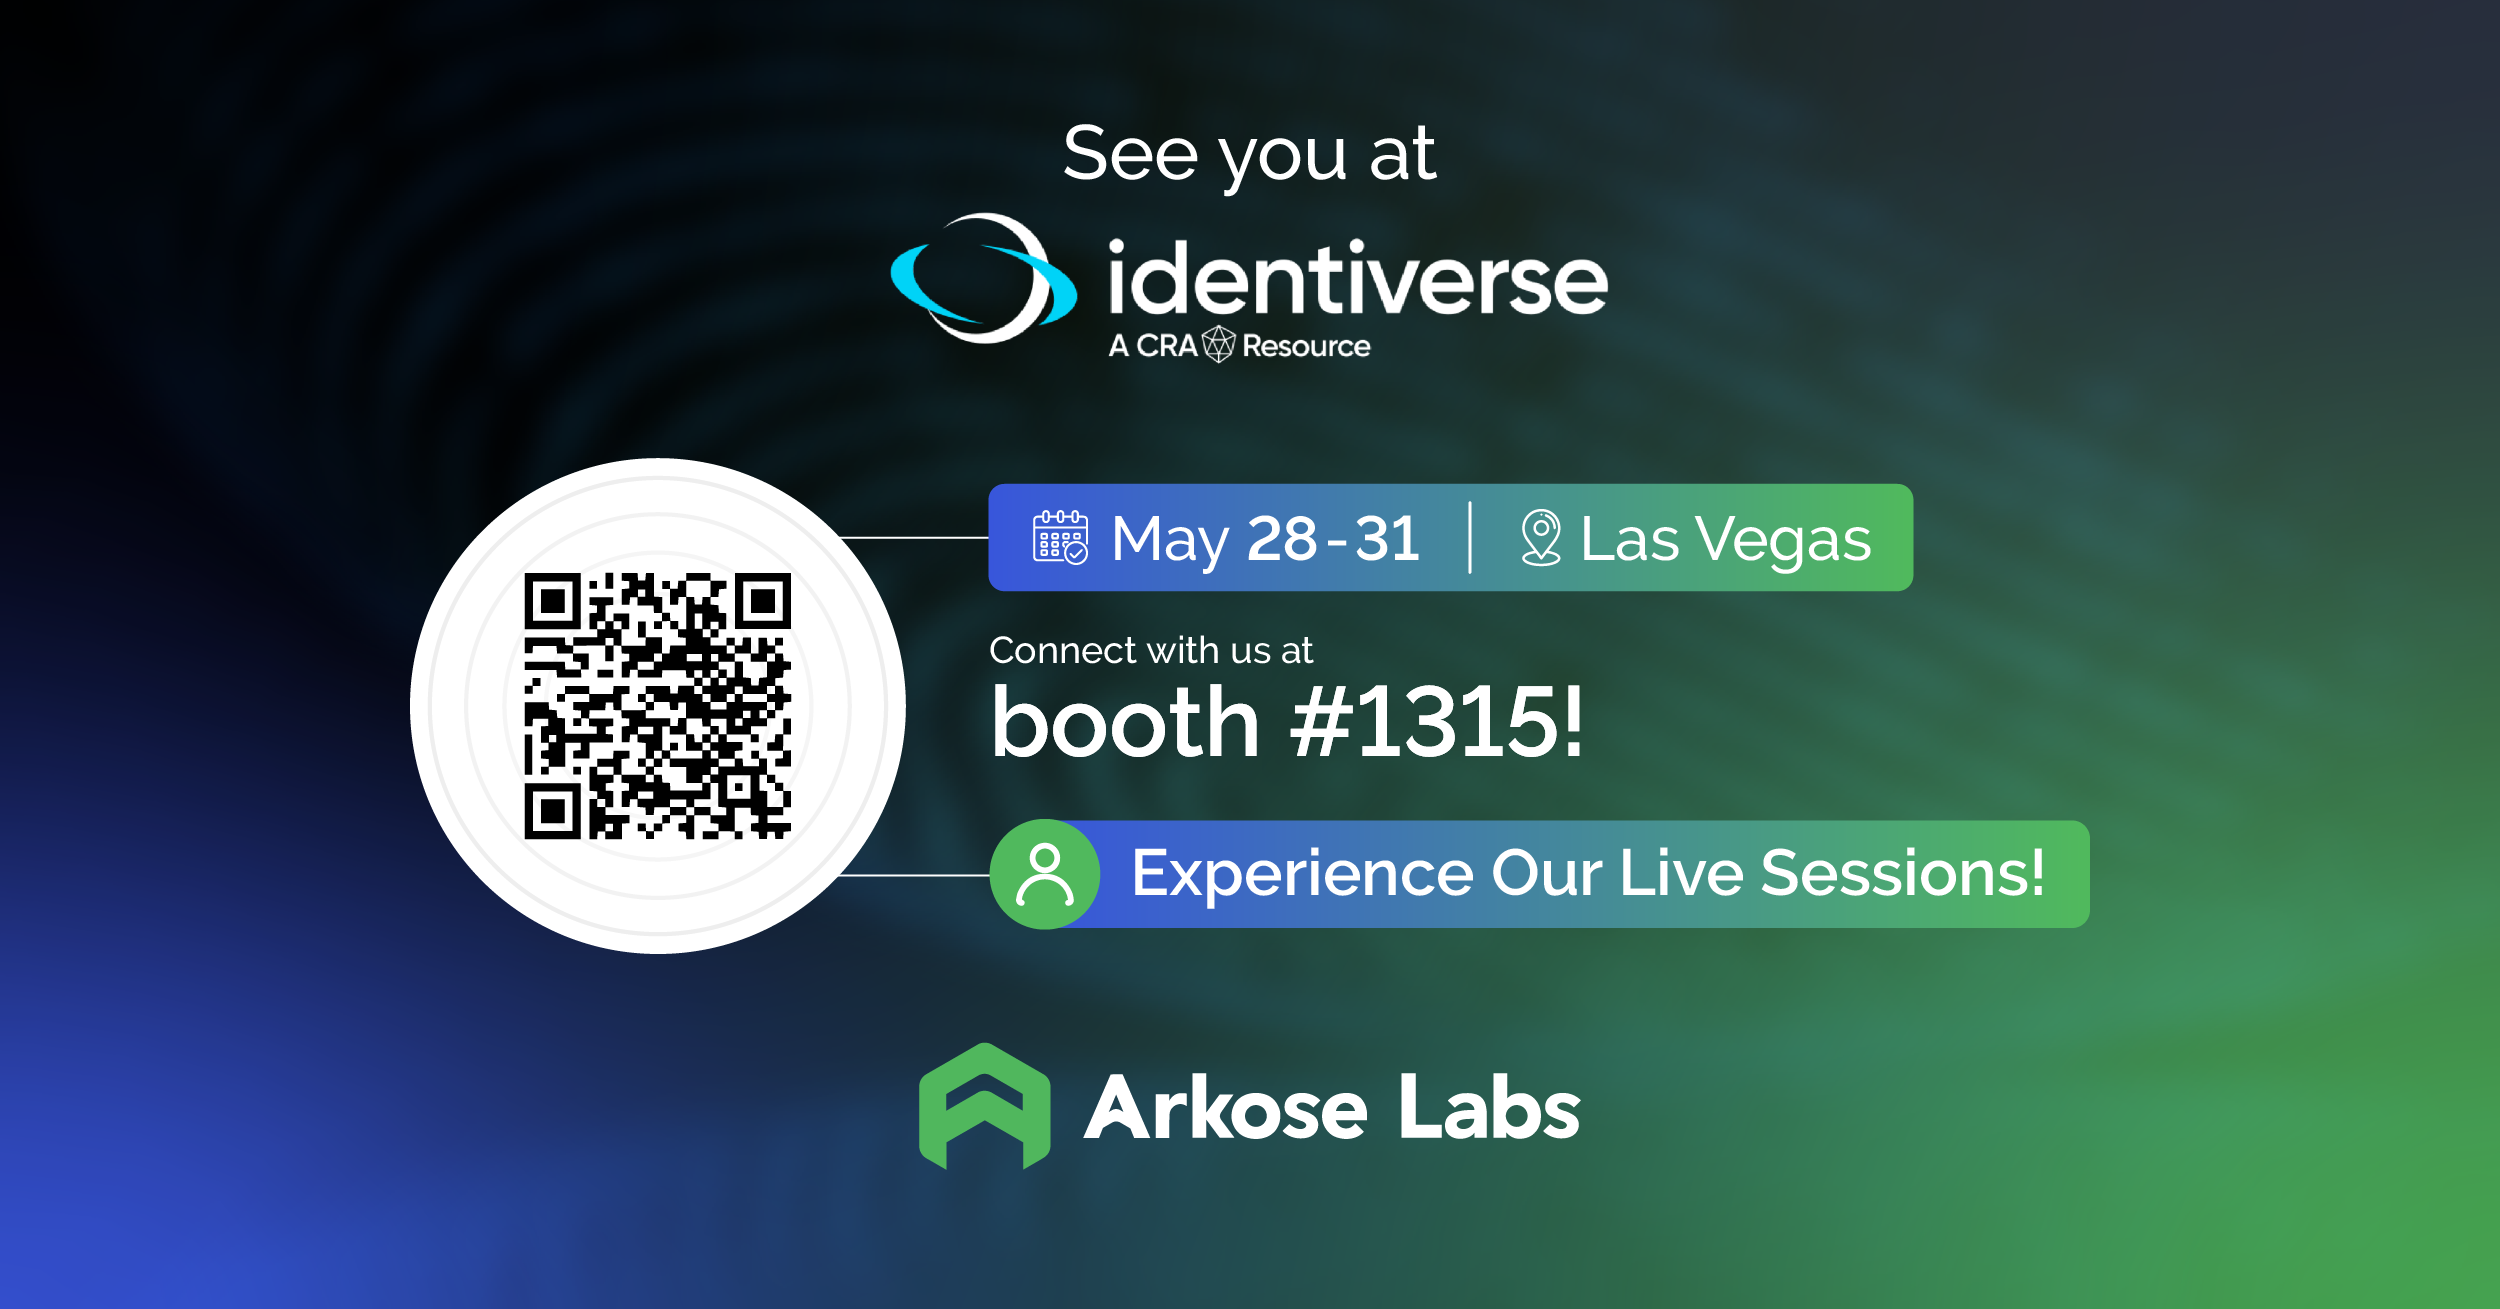 See you at Identiverse